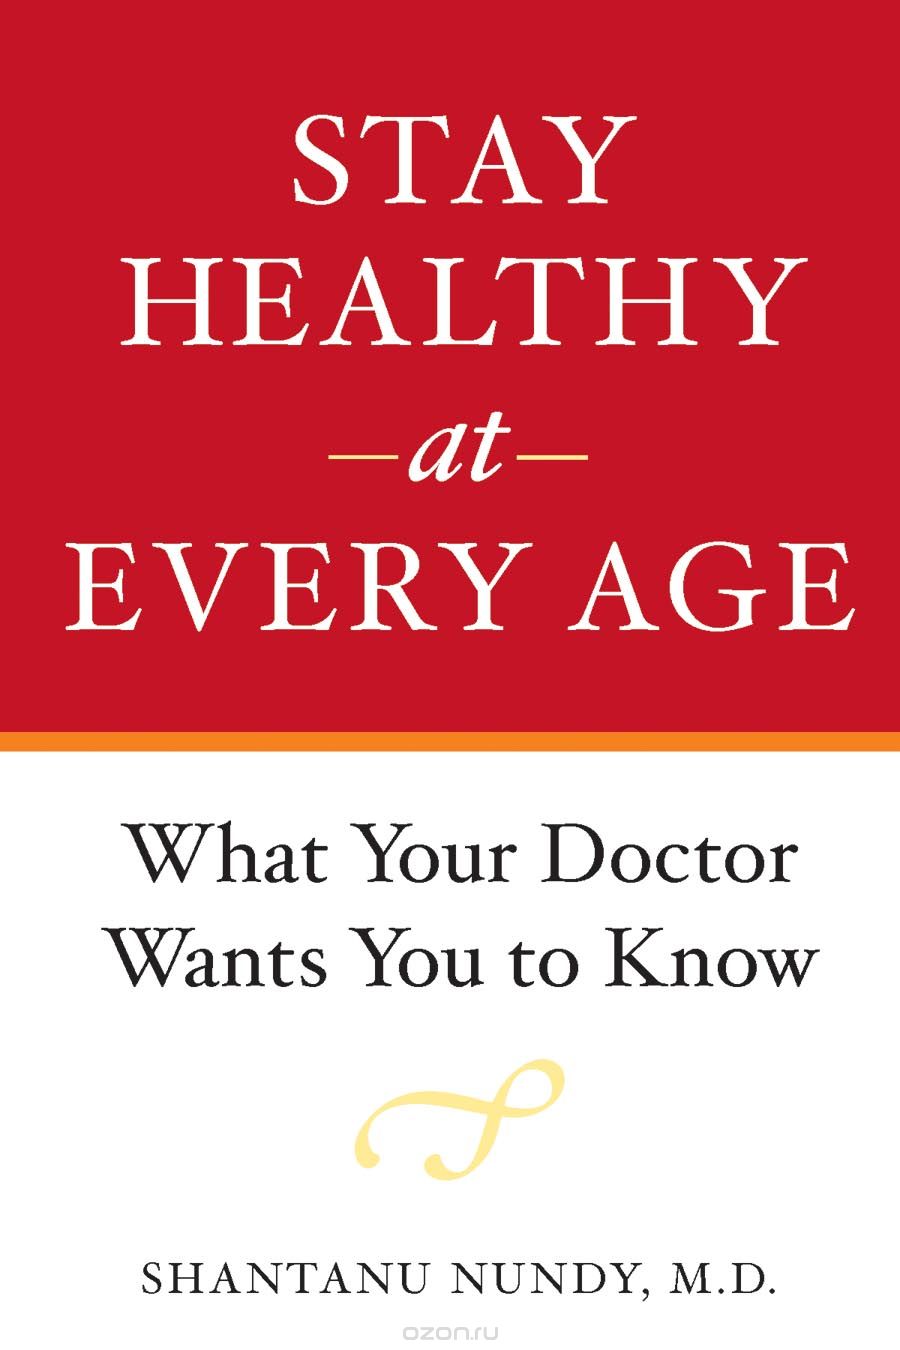 Stay Healthy at Every Age – What Your Doctor Wants You to Know